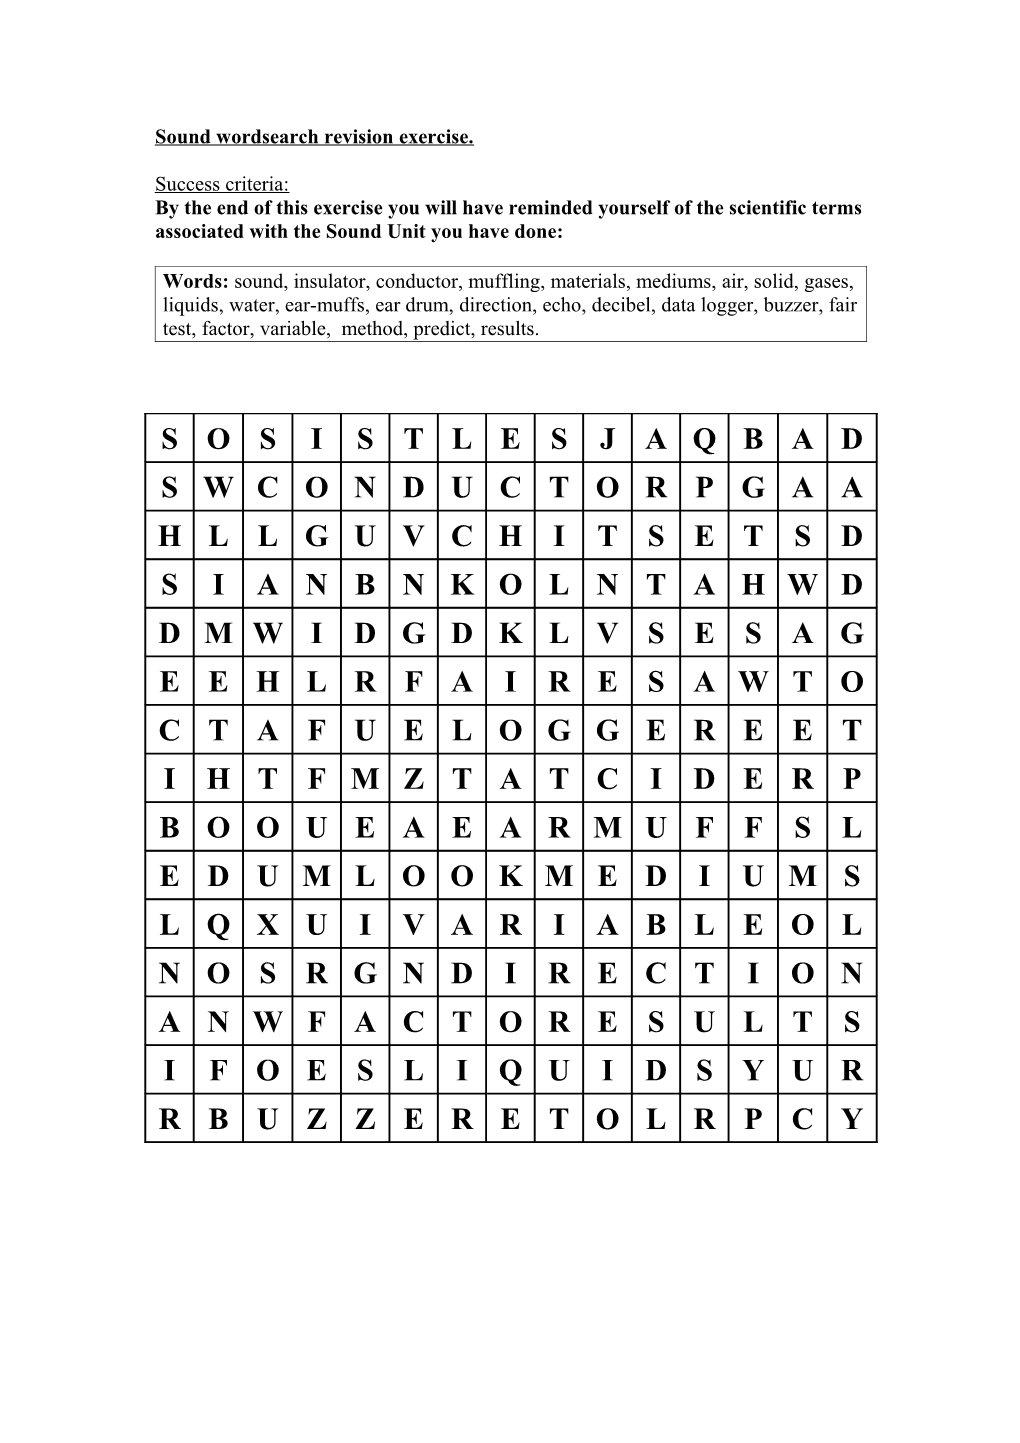 Sound Wordsearch Revision Exercise